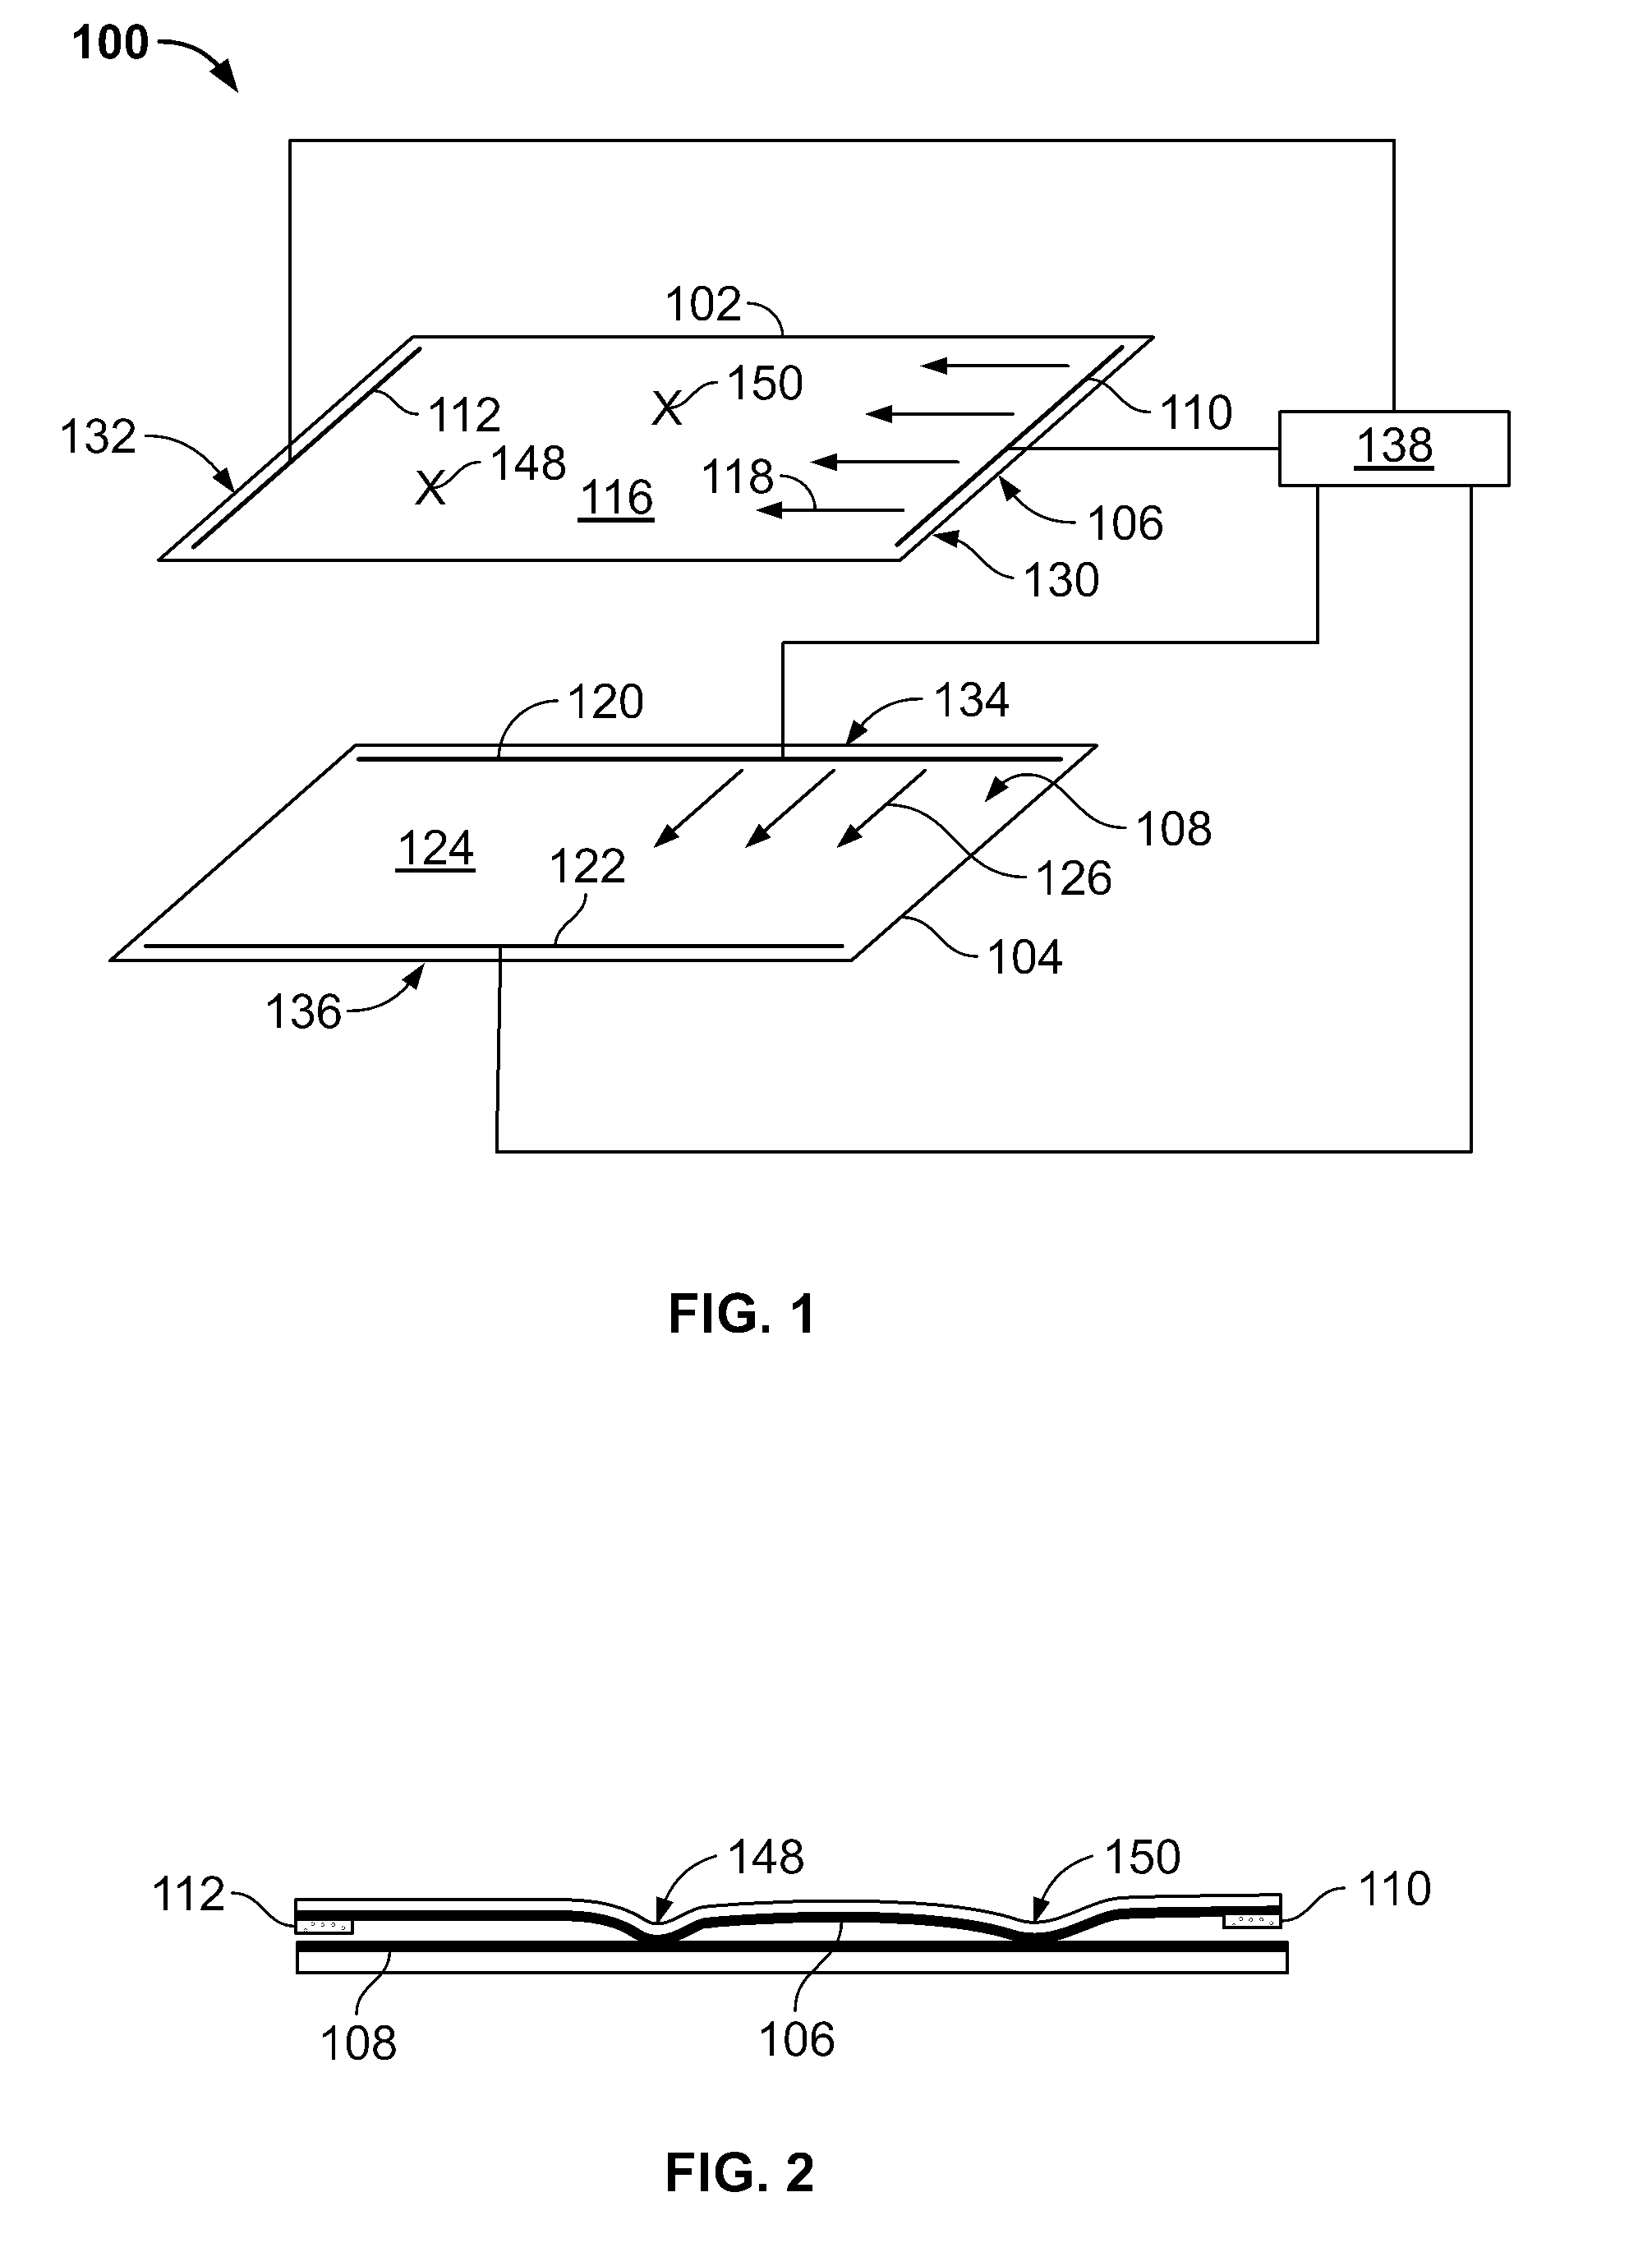 Method and apparatus for detecting two simultaneous touches and gestures on a resistive touchscreen